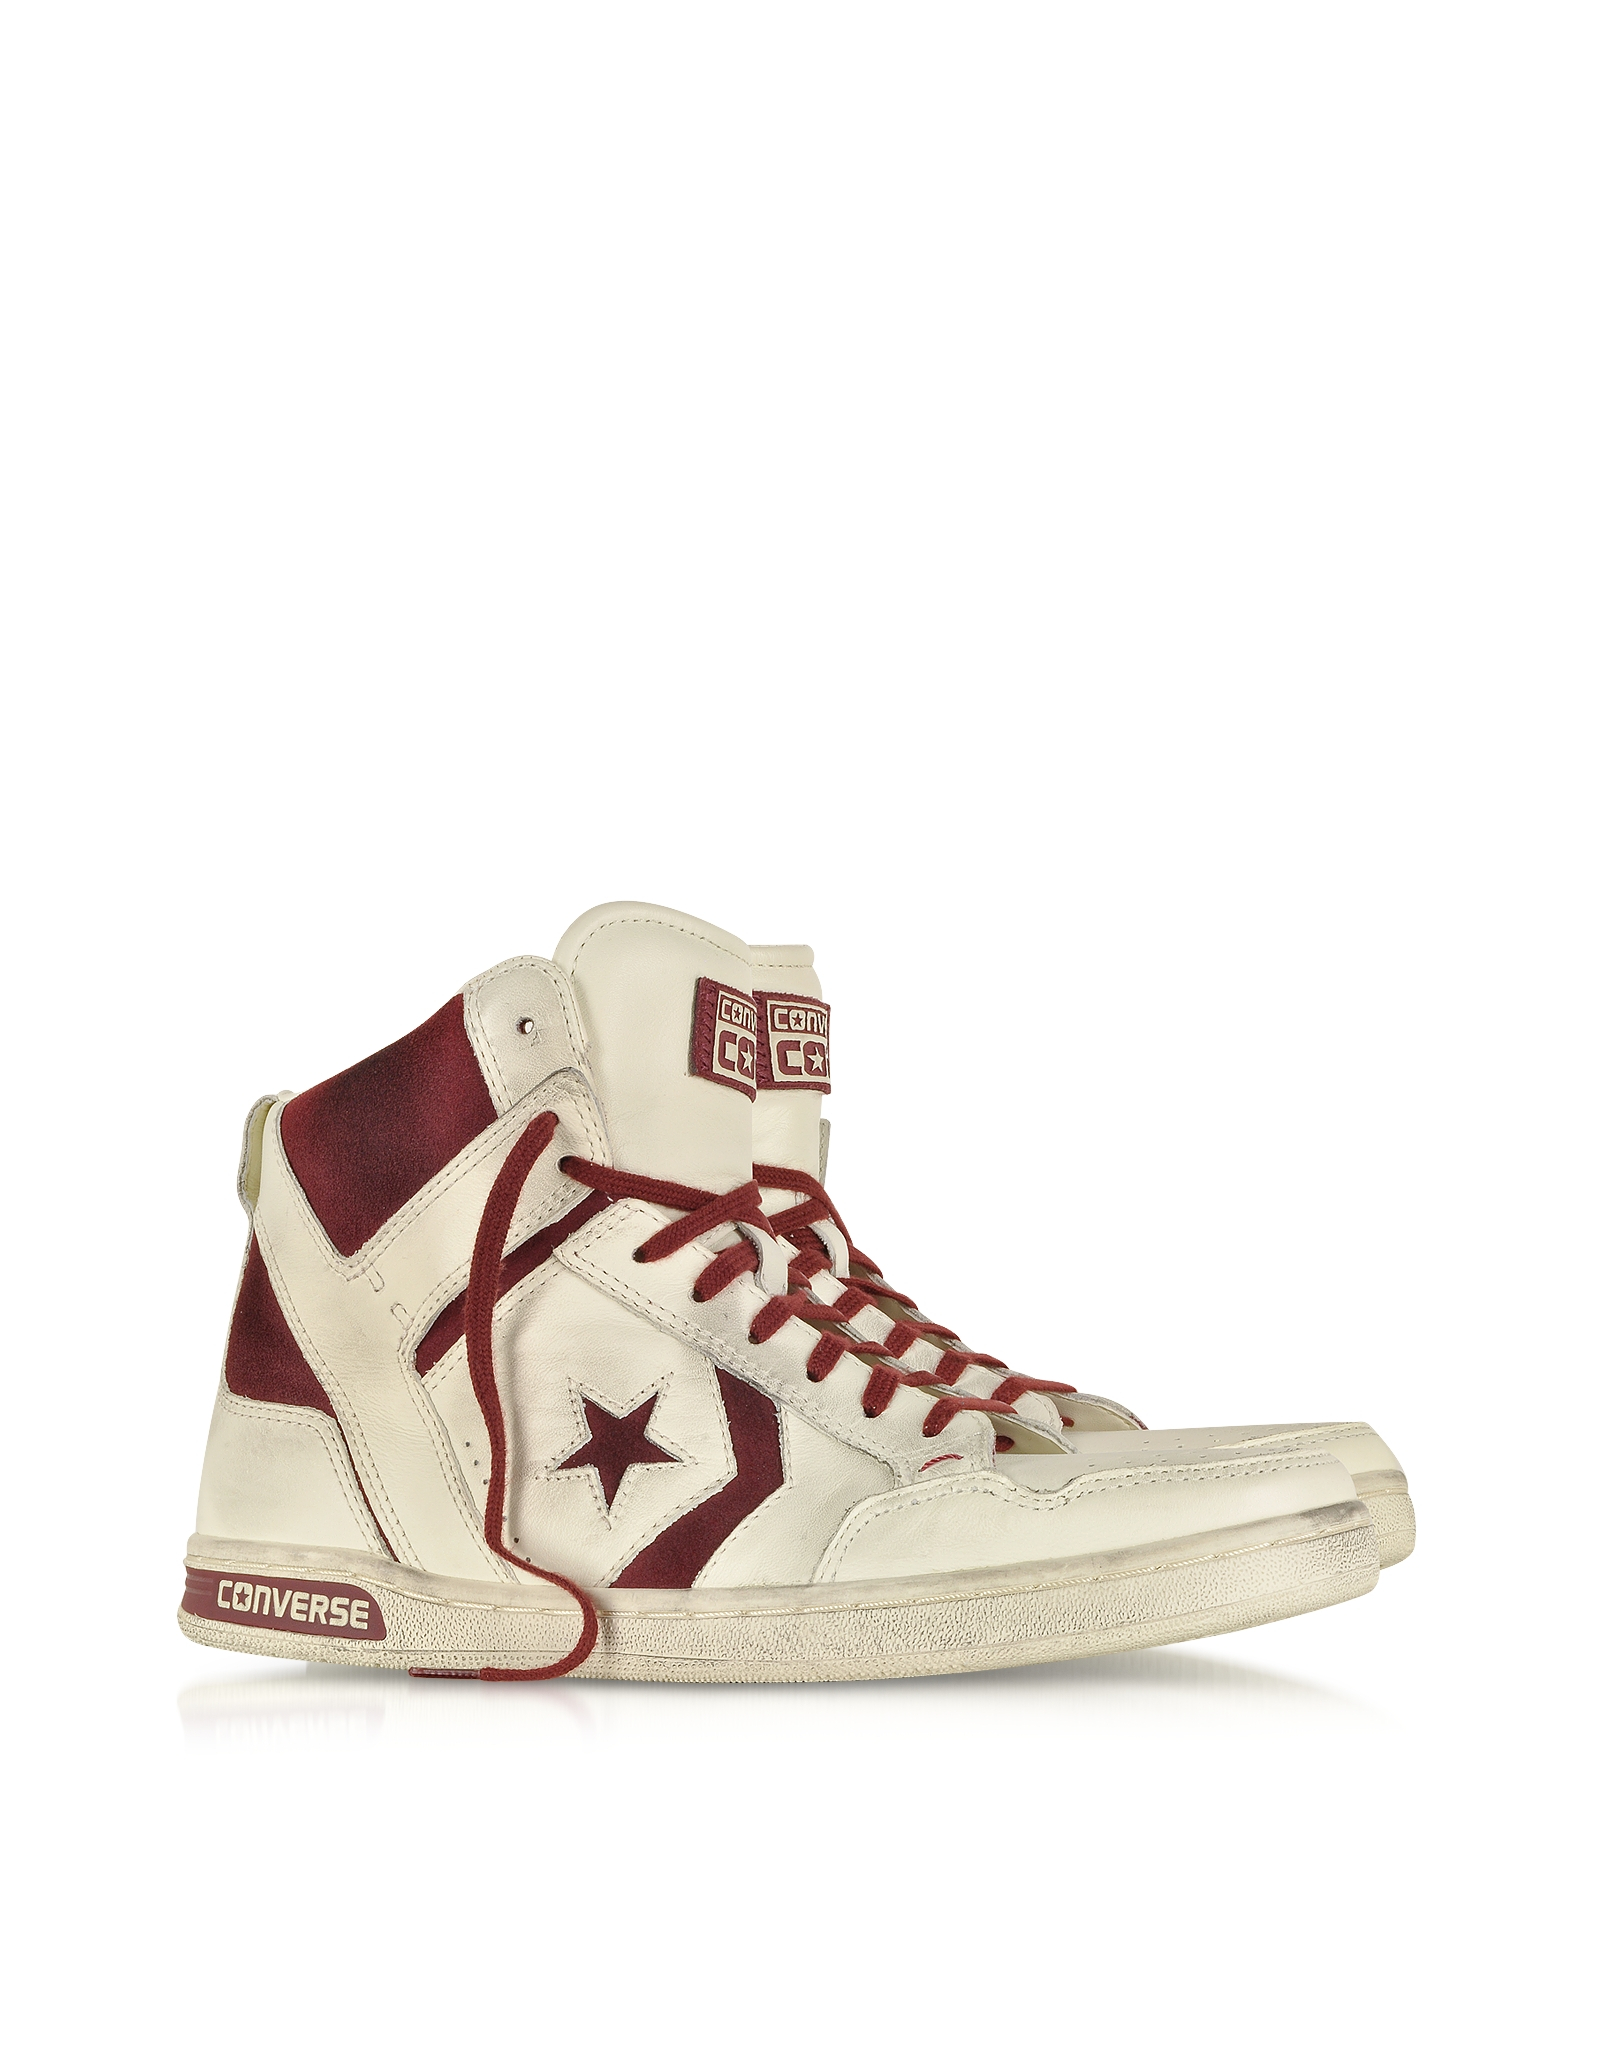 Converse Jv Weapon Hi White Leather and Burgundy Suede Sneaker for Men -  Lyst